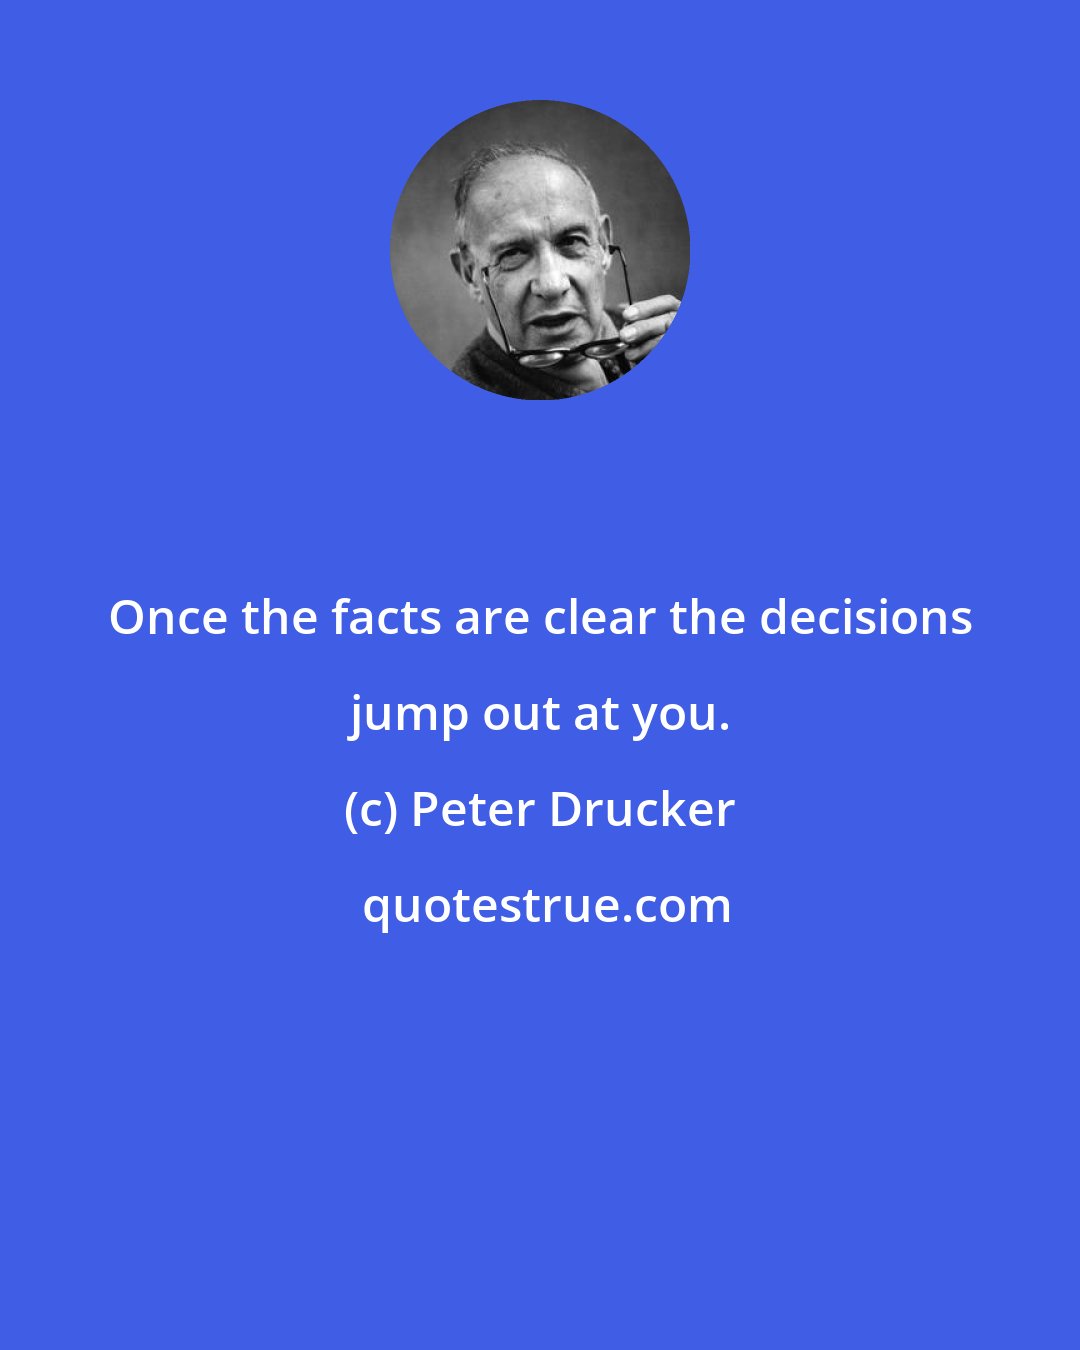 Peter Drucker: Once the facts are clear the decisions jump out at you.